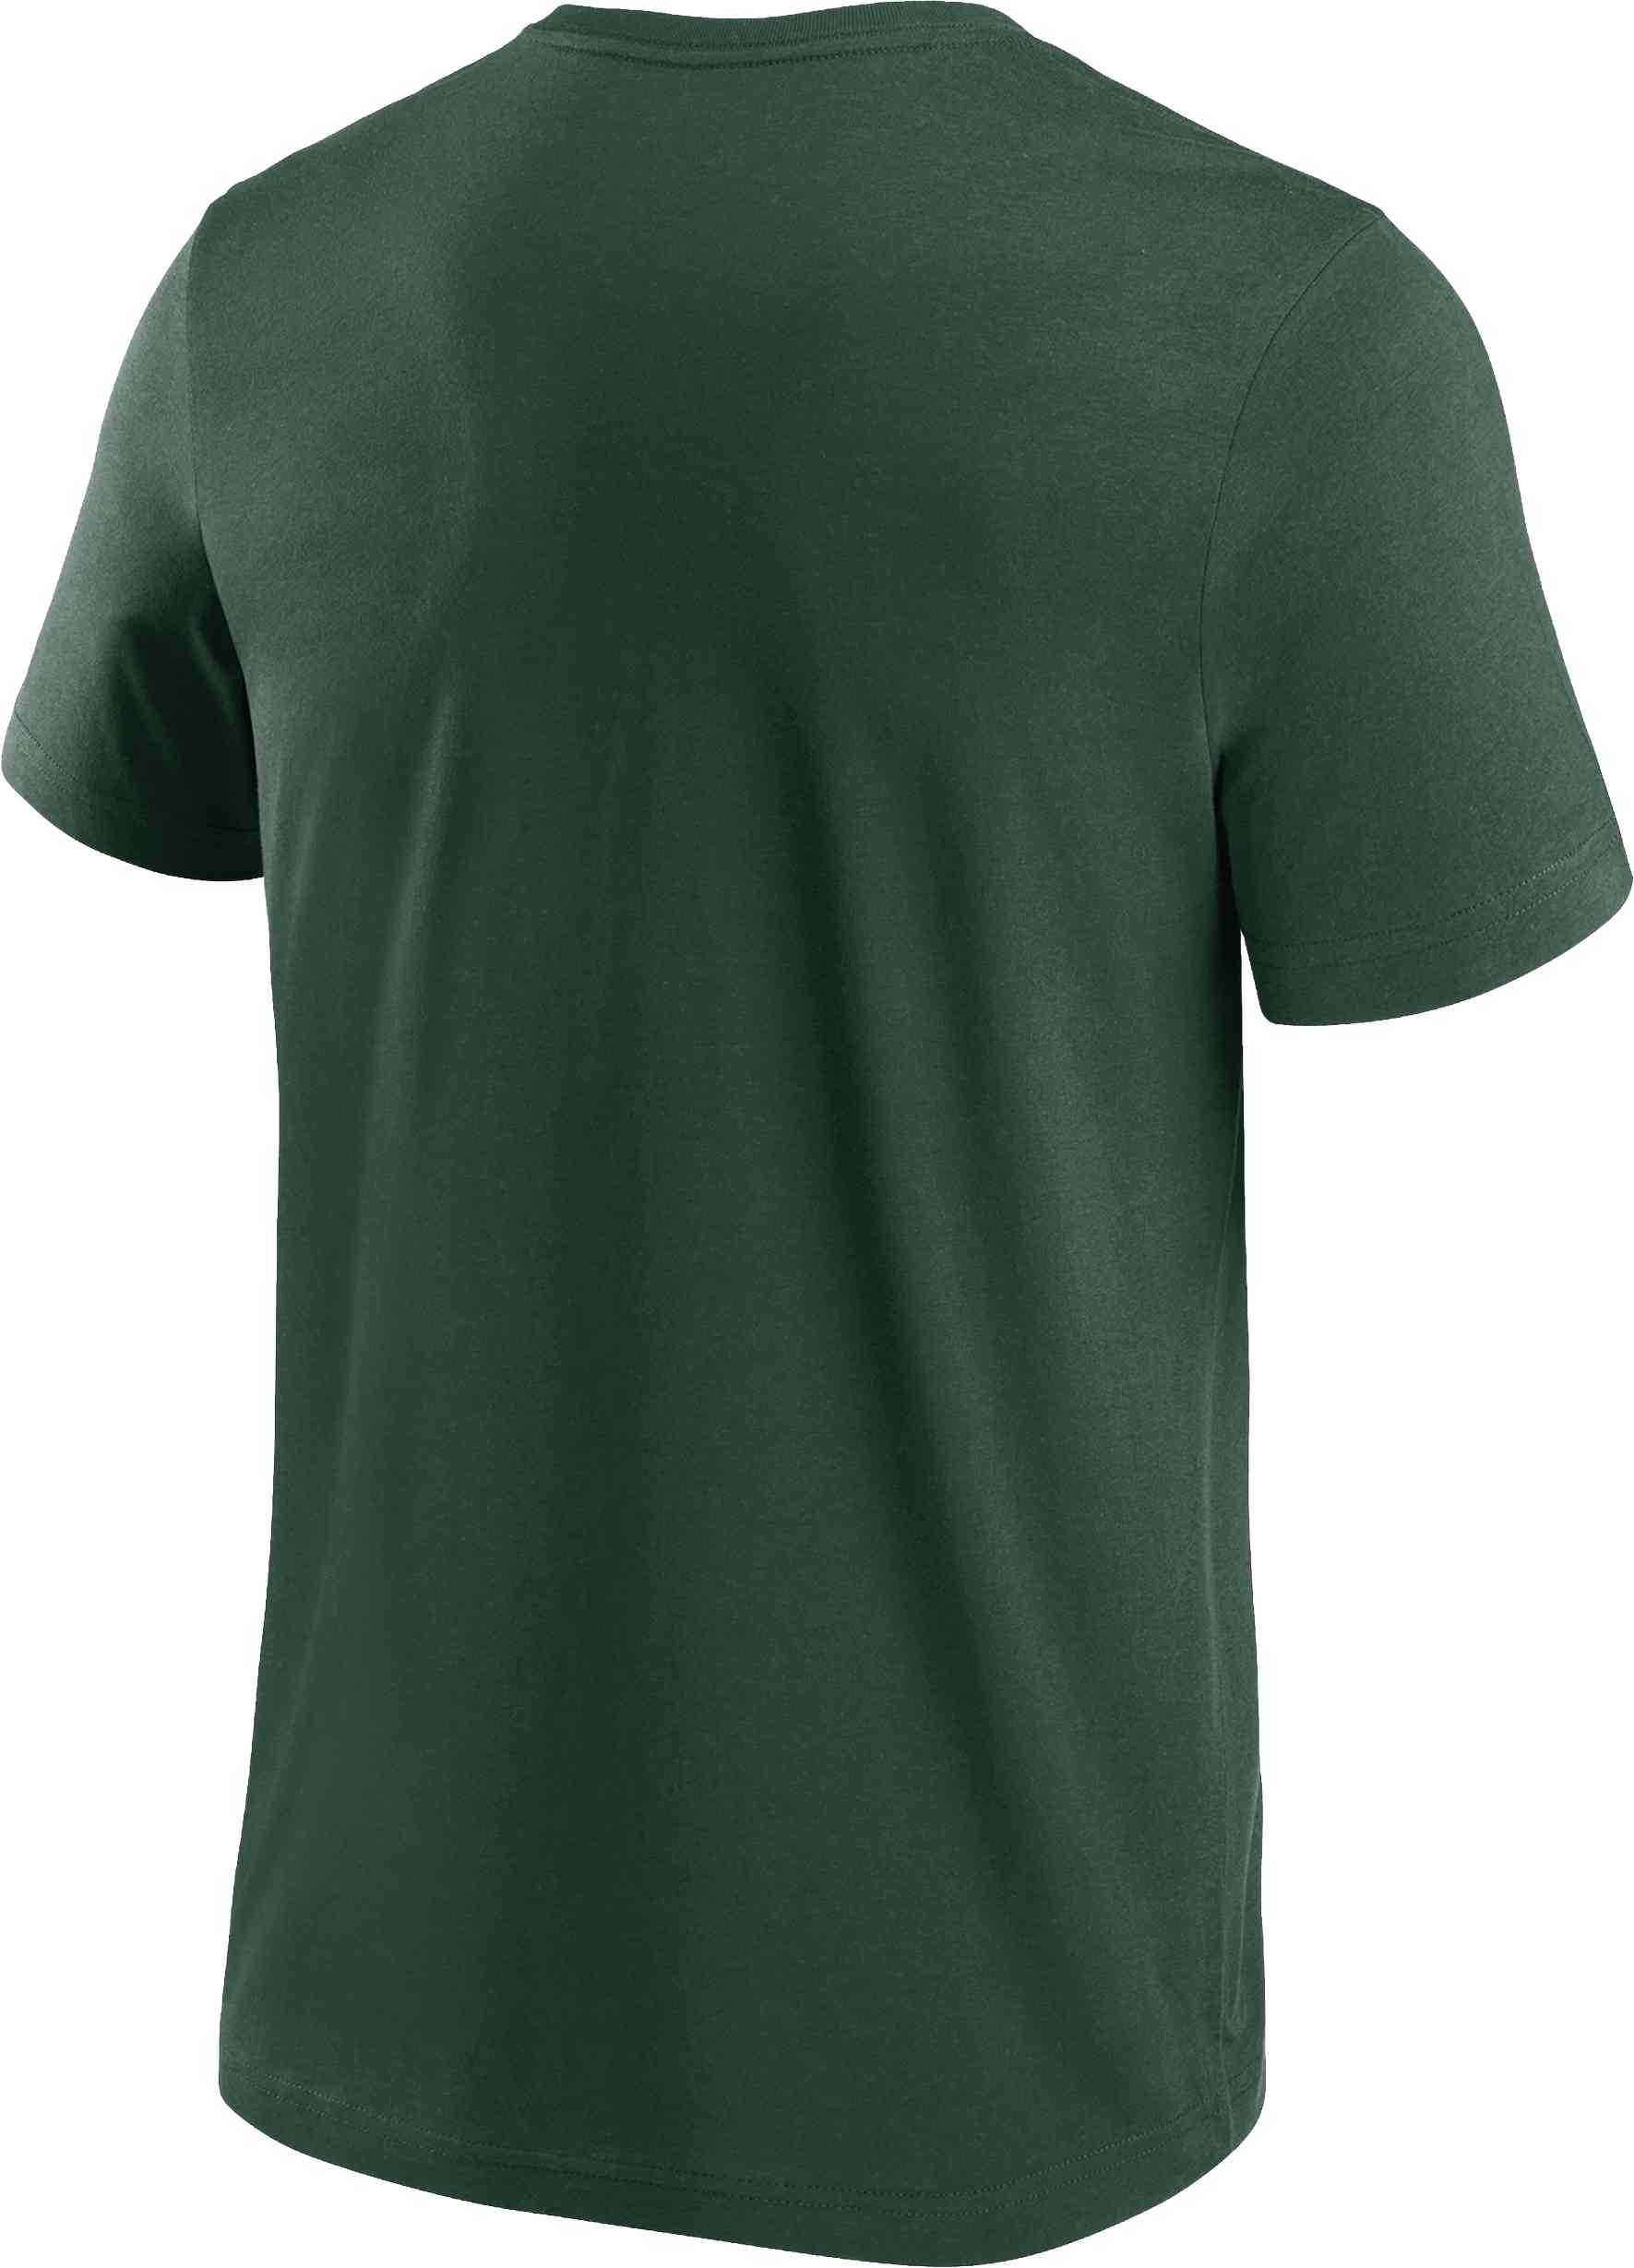 Fanatics - NFL Green Bay Packers Primary Logo Graphic T-Shirt